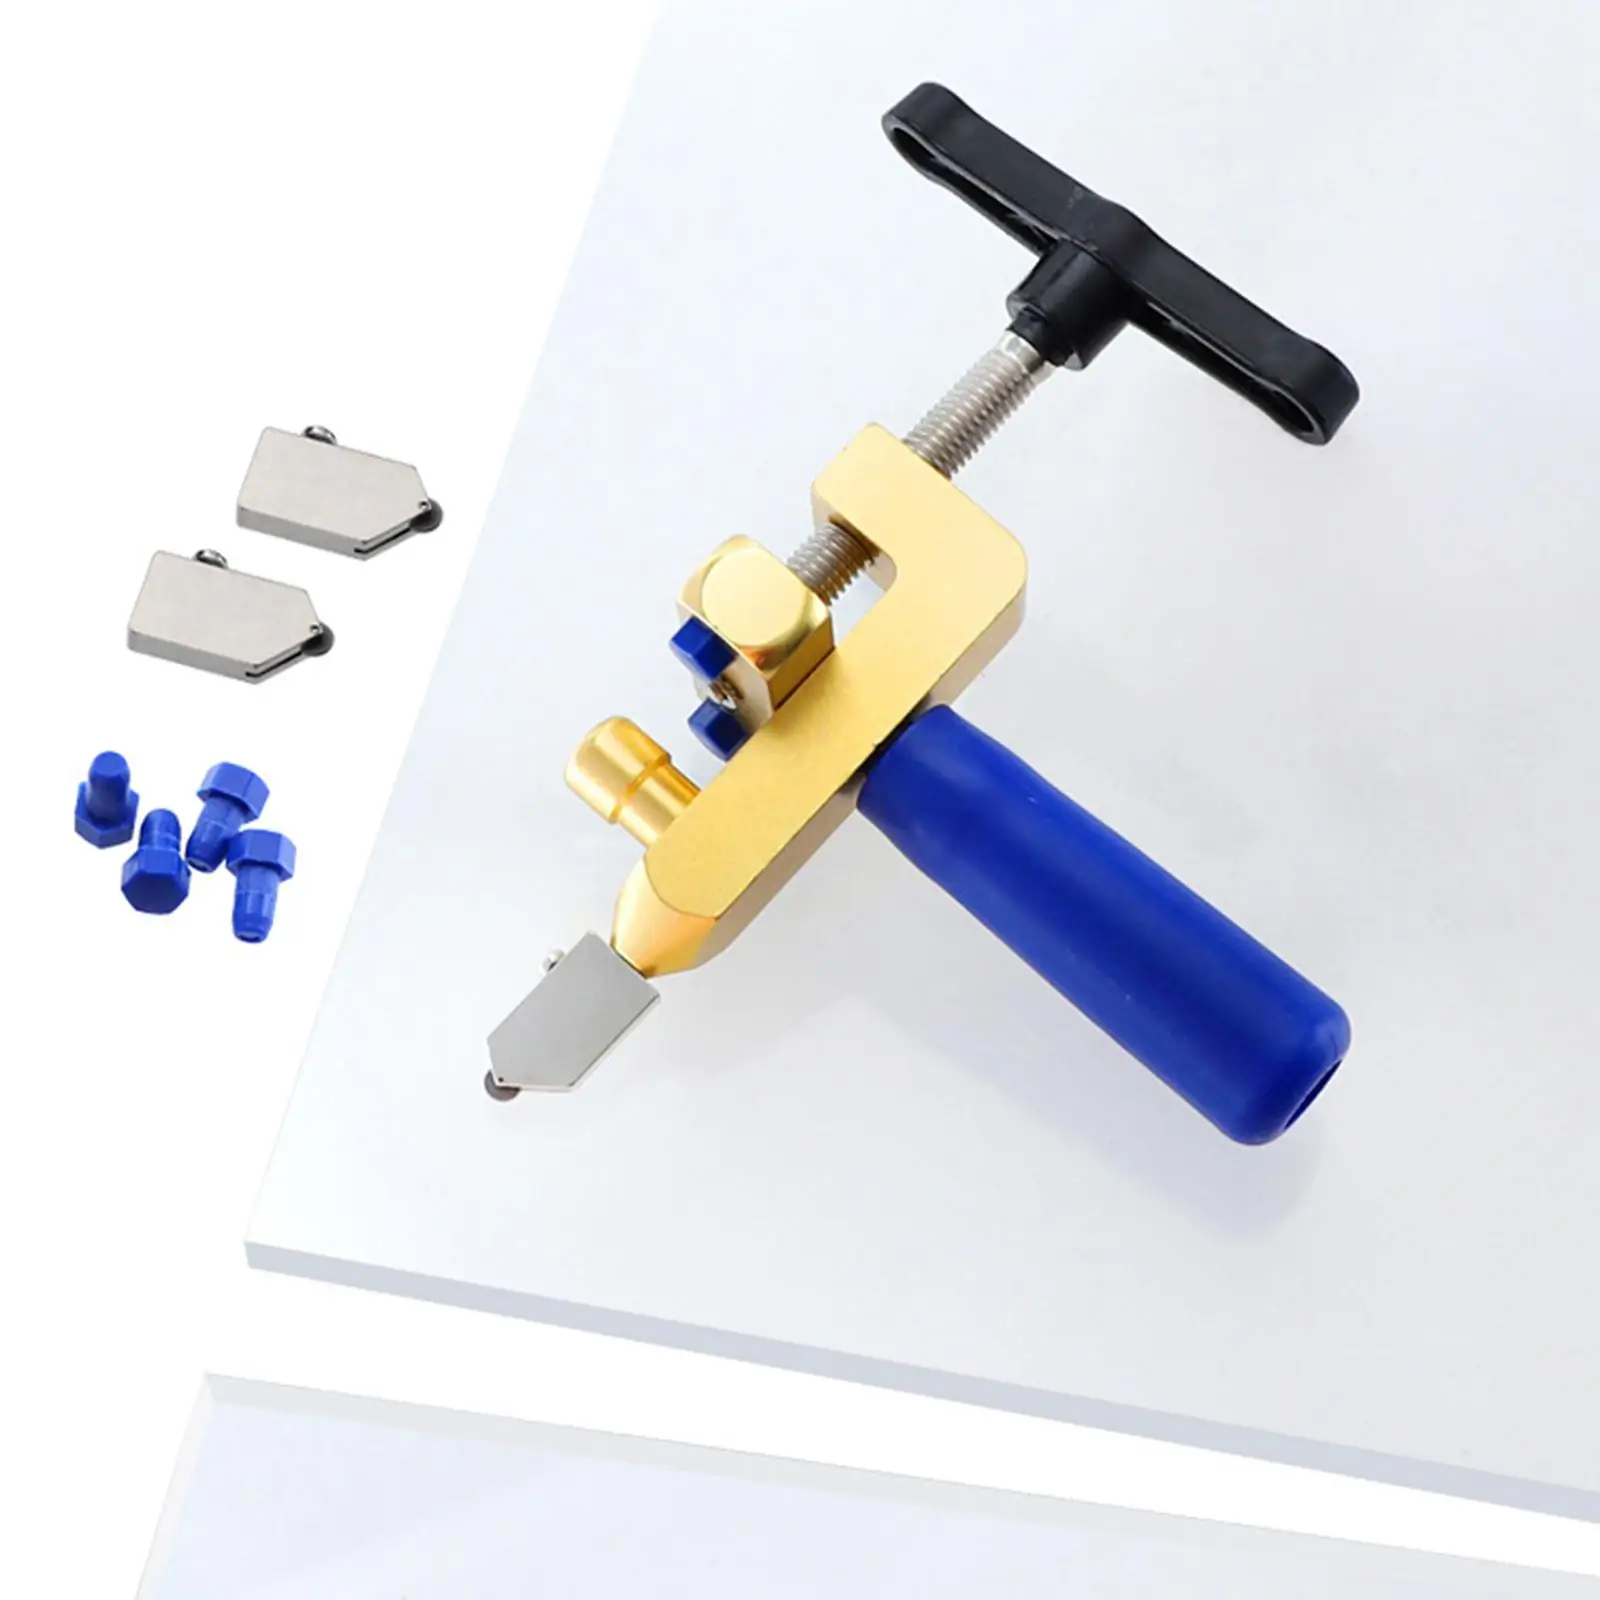 Professional Carbide Alloy Steel Glass Cutter Tool with Range 3-15mm Professional Cutter for Thick Glass and Tiles